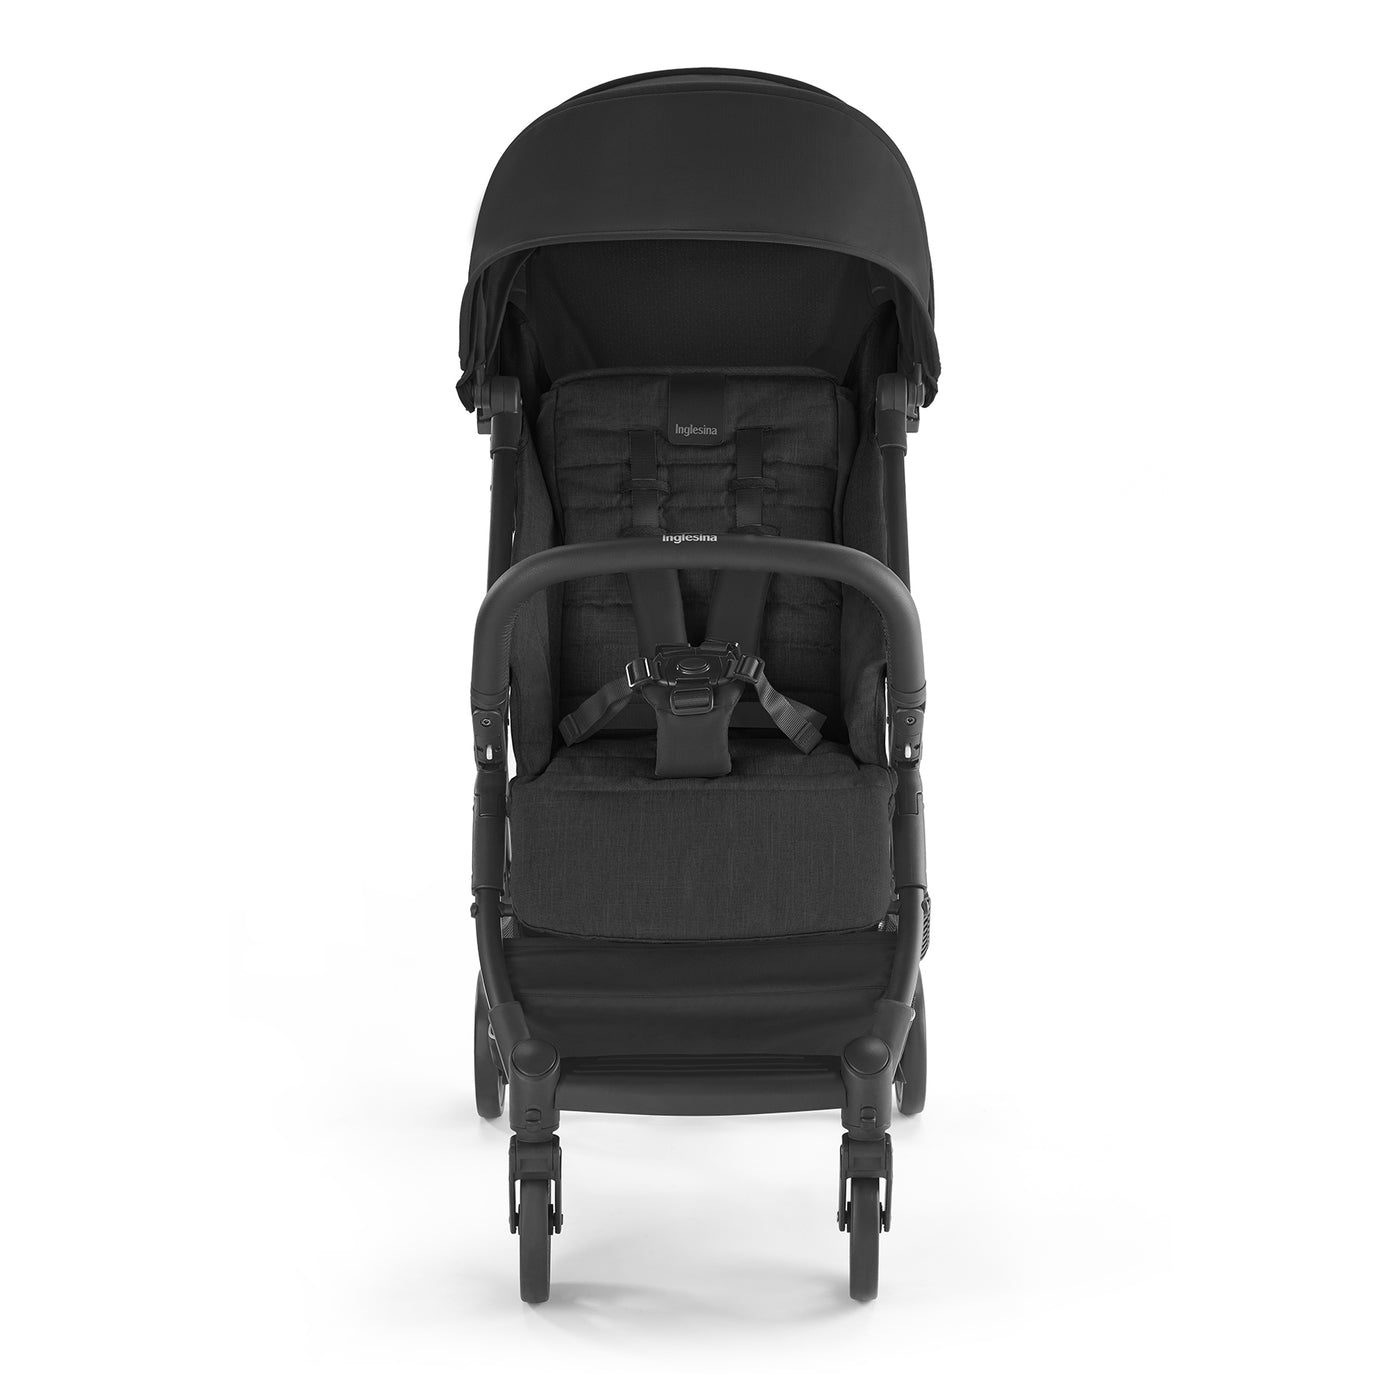 Inglesina Quid Stroller Review (100+ Tests by Kid Travel)